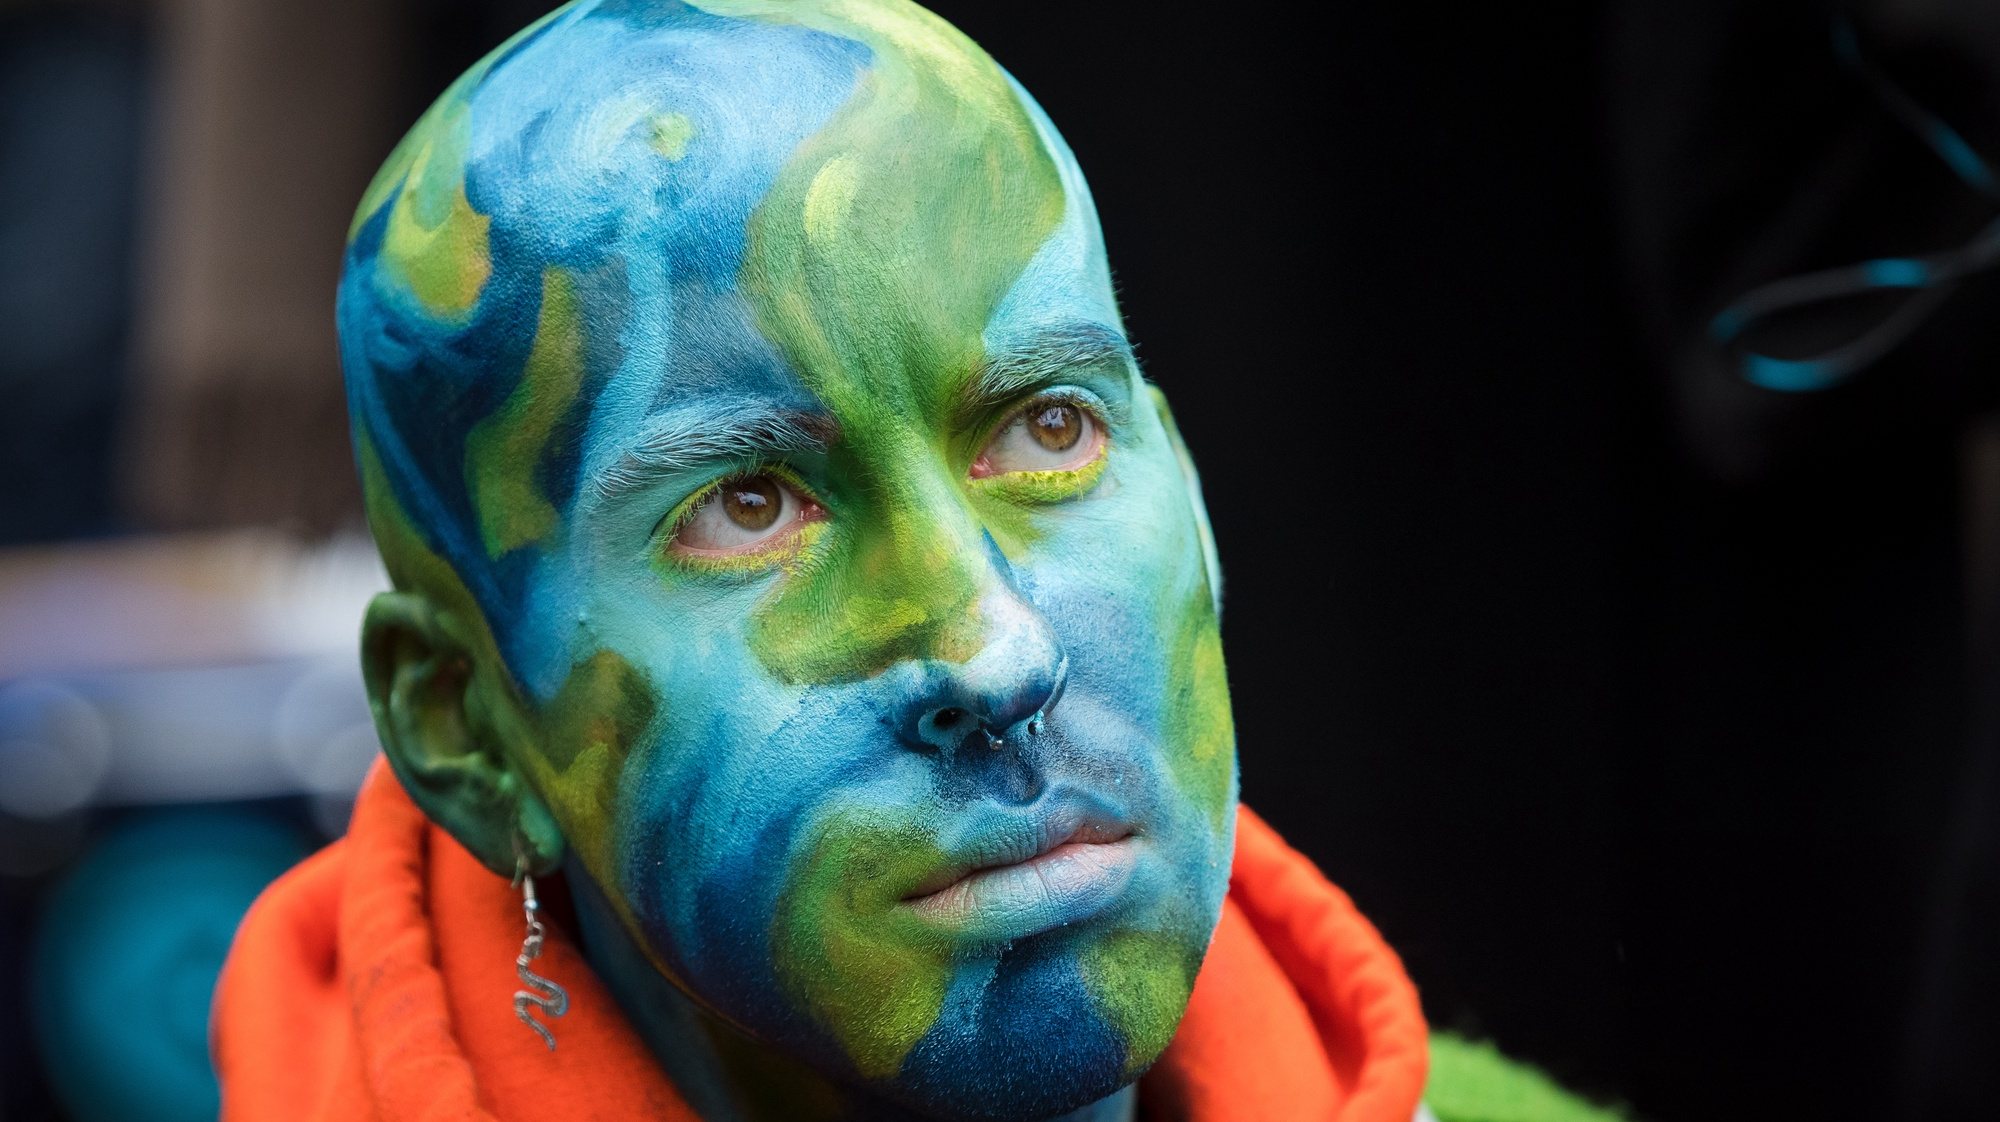 epa07904194 An Extinction Rebellion protester with his head painted in the colors of planet Earth sits in the road in Trafalgar Square during a rally in London, Britain, 07 October 2019. The global environmental movement Extinction Rebellion announced worldwide  climate change protests and blockades starting 07 October.  EPA/VICKIE FLORES